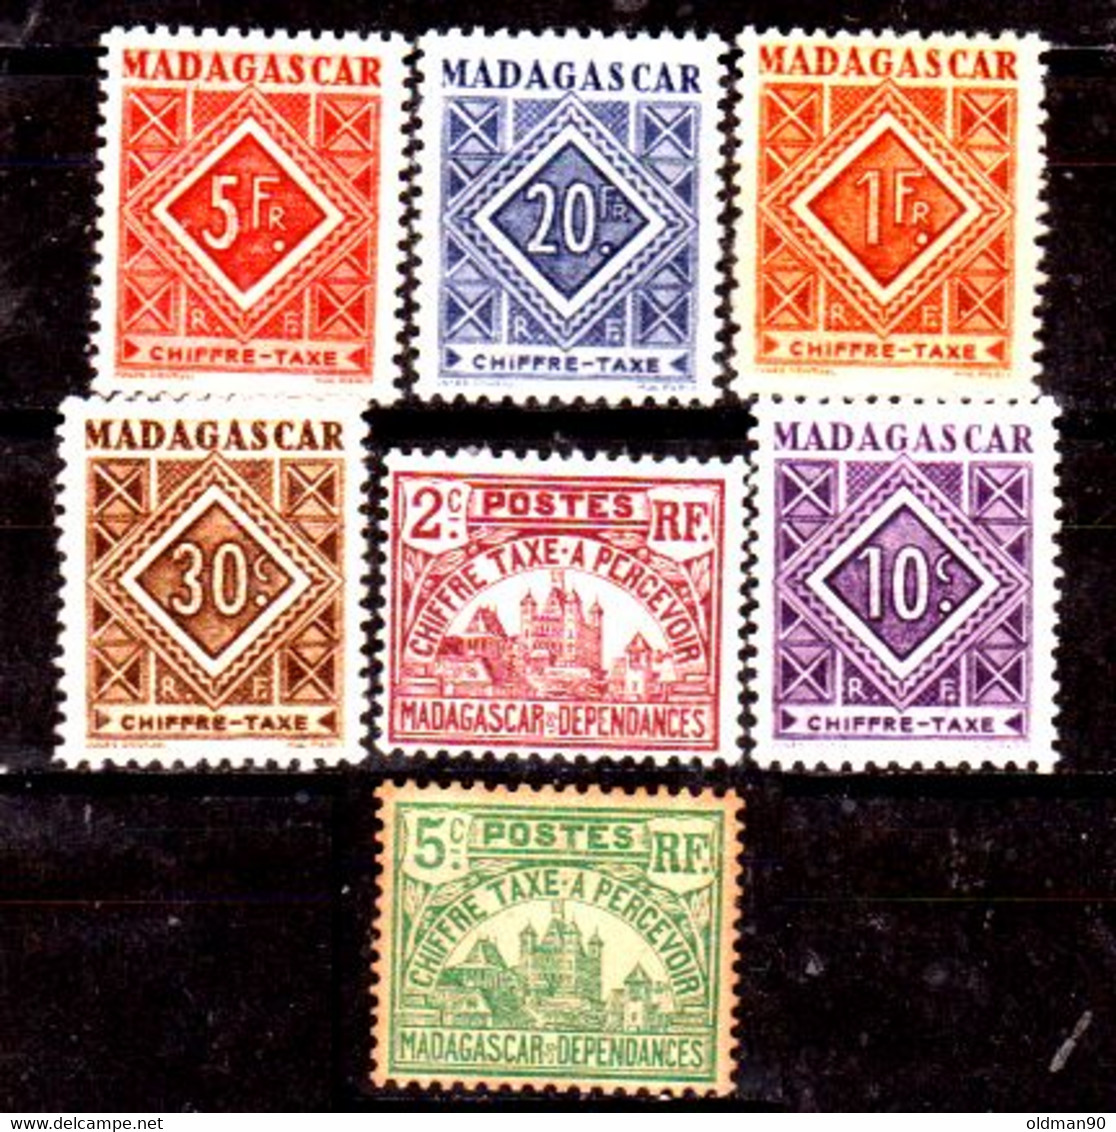 Madagascar -137- POSTAGE DUE STAMPS, Issued By 1908-1962 - Quality In Your Opinion. - Portomarken